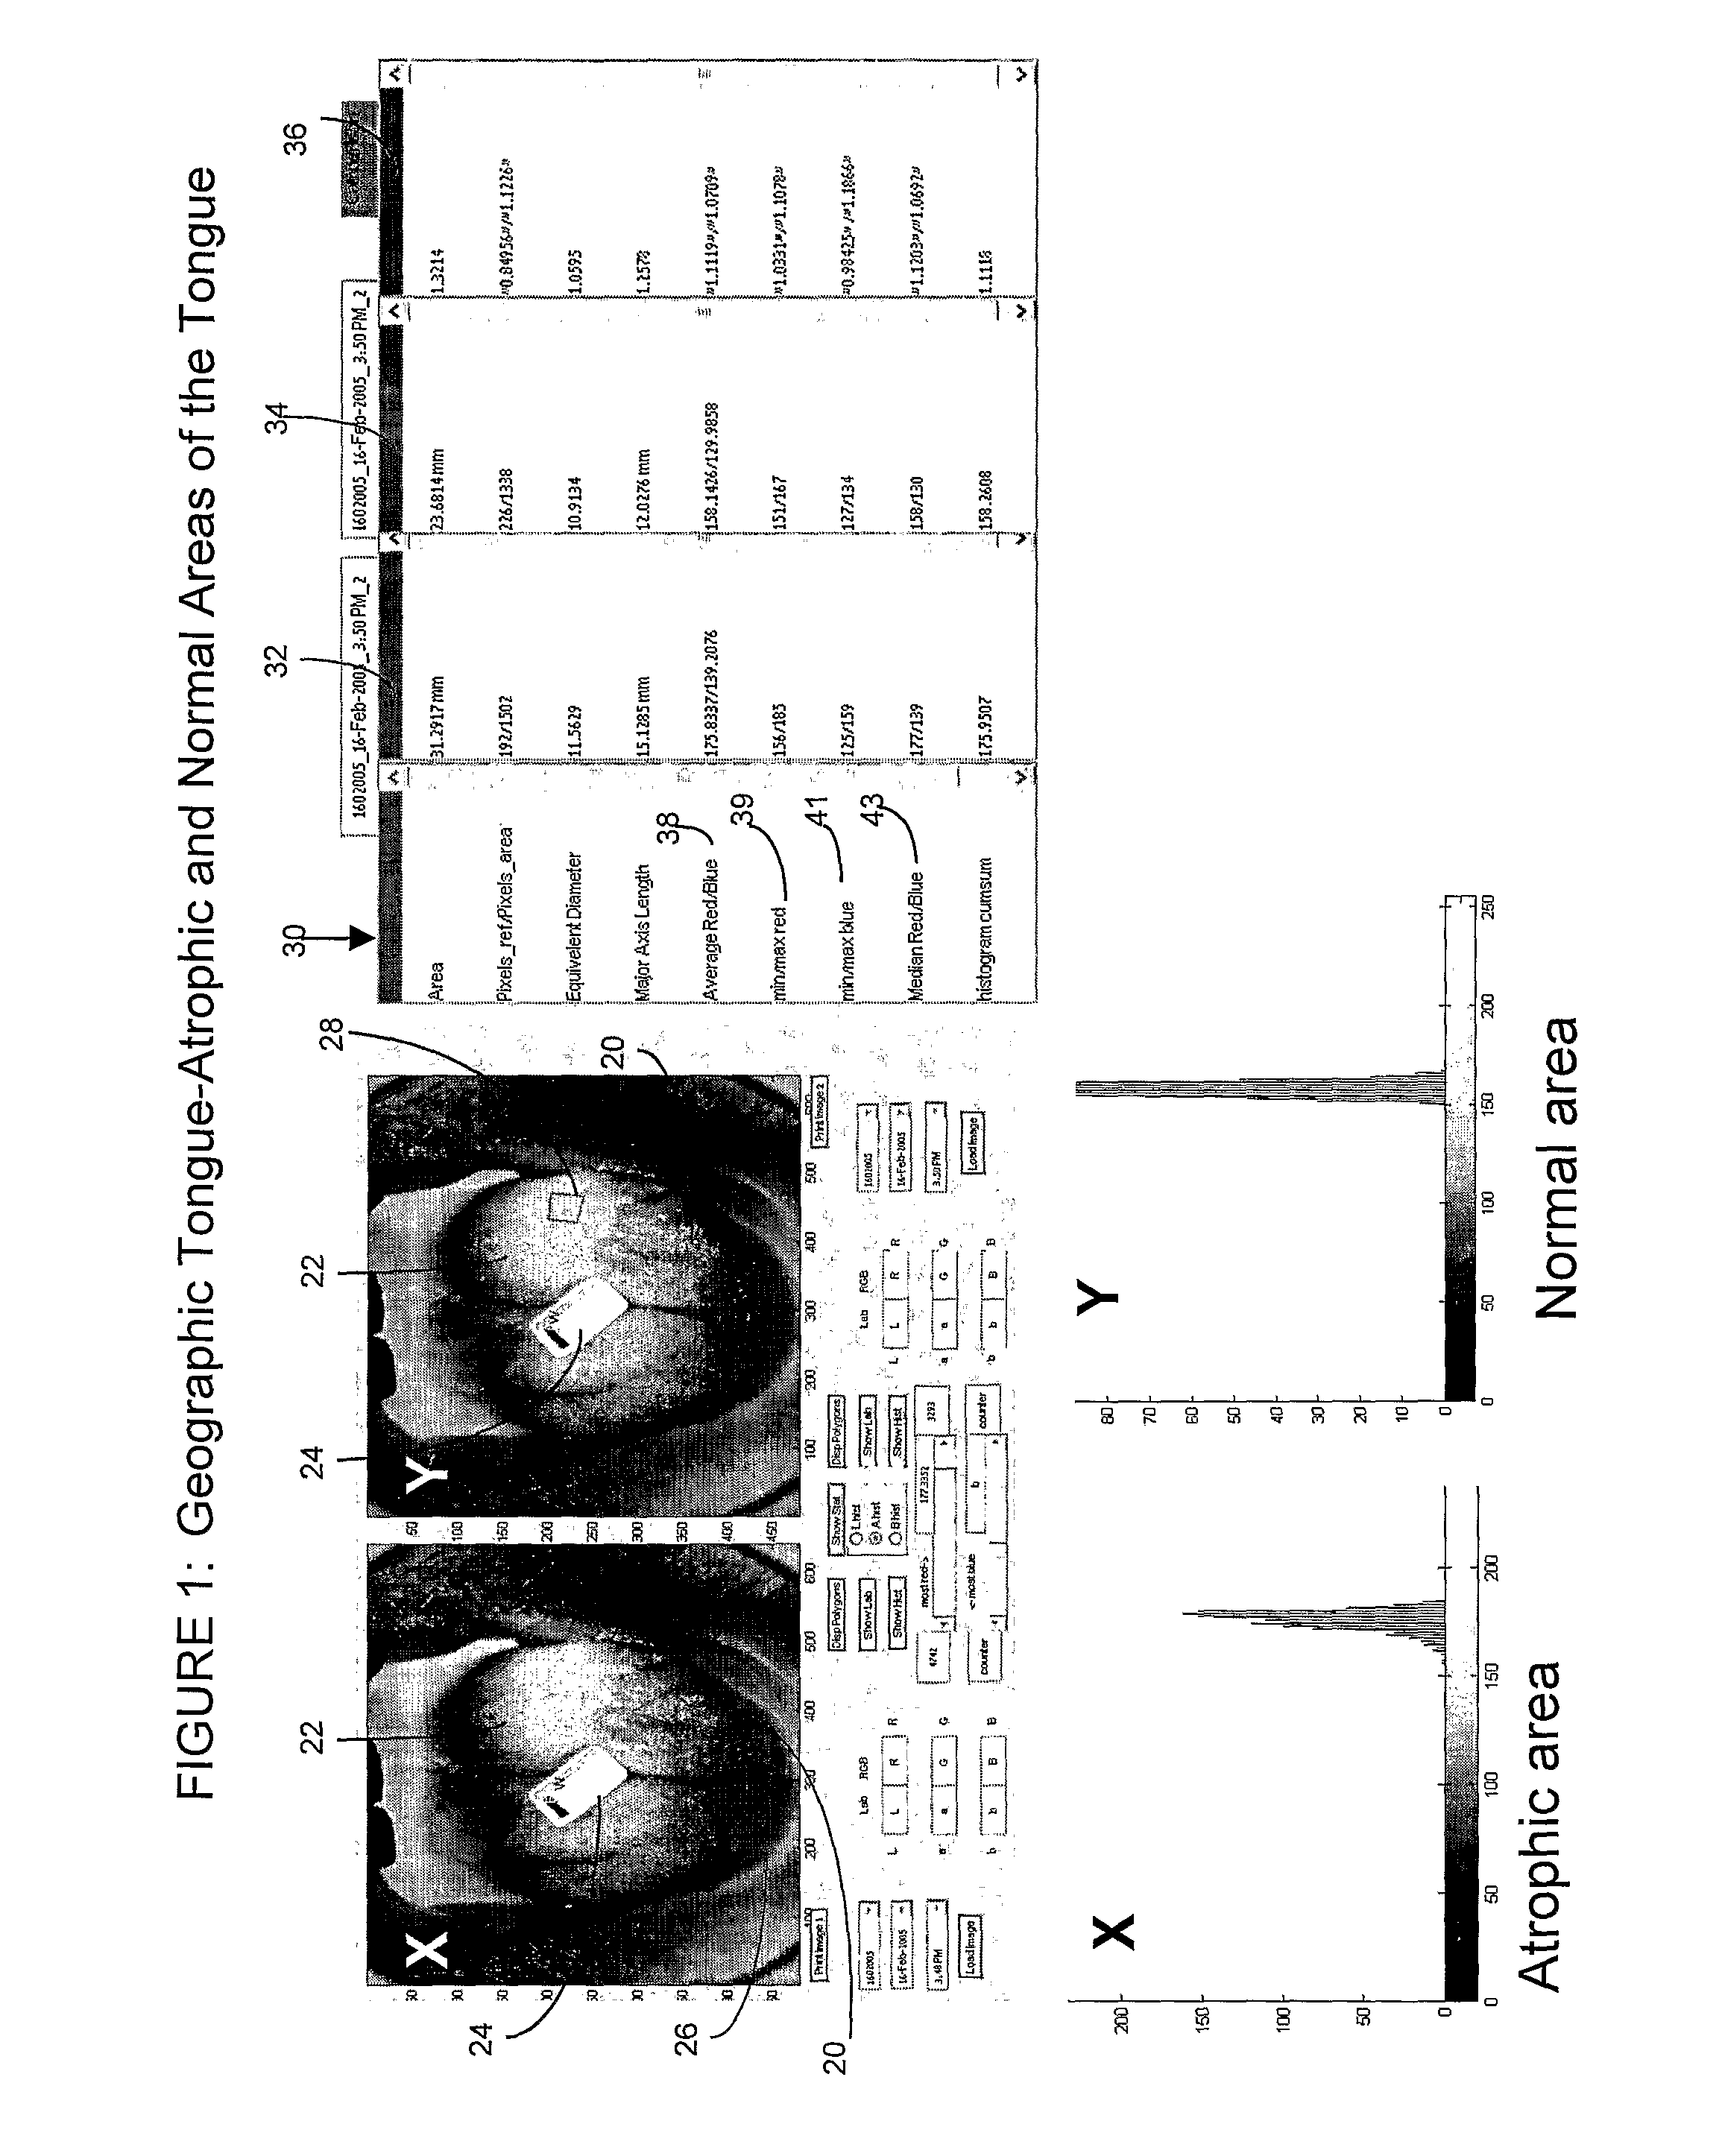 Medical Imaging Method and System